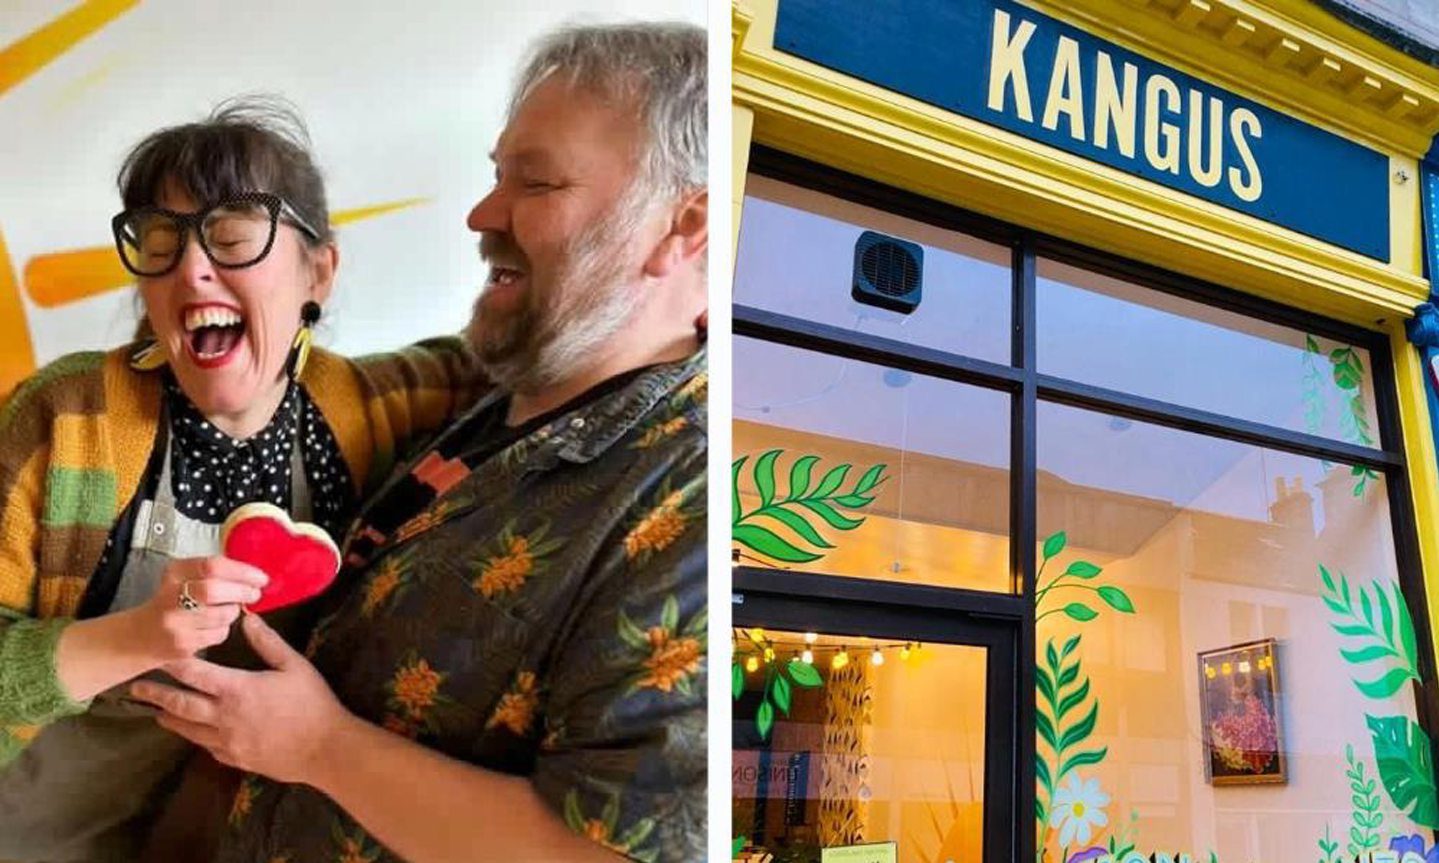 Kirsty and Tony Strachan who own Kangus Coffee House in Kirkcaldy.